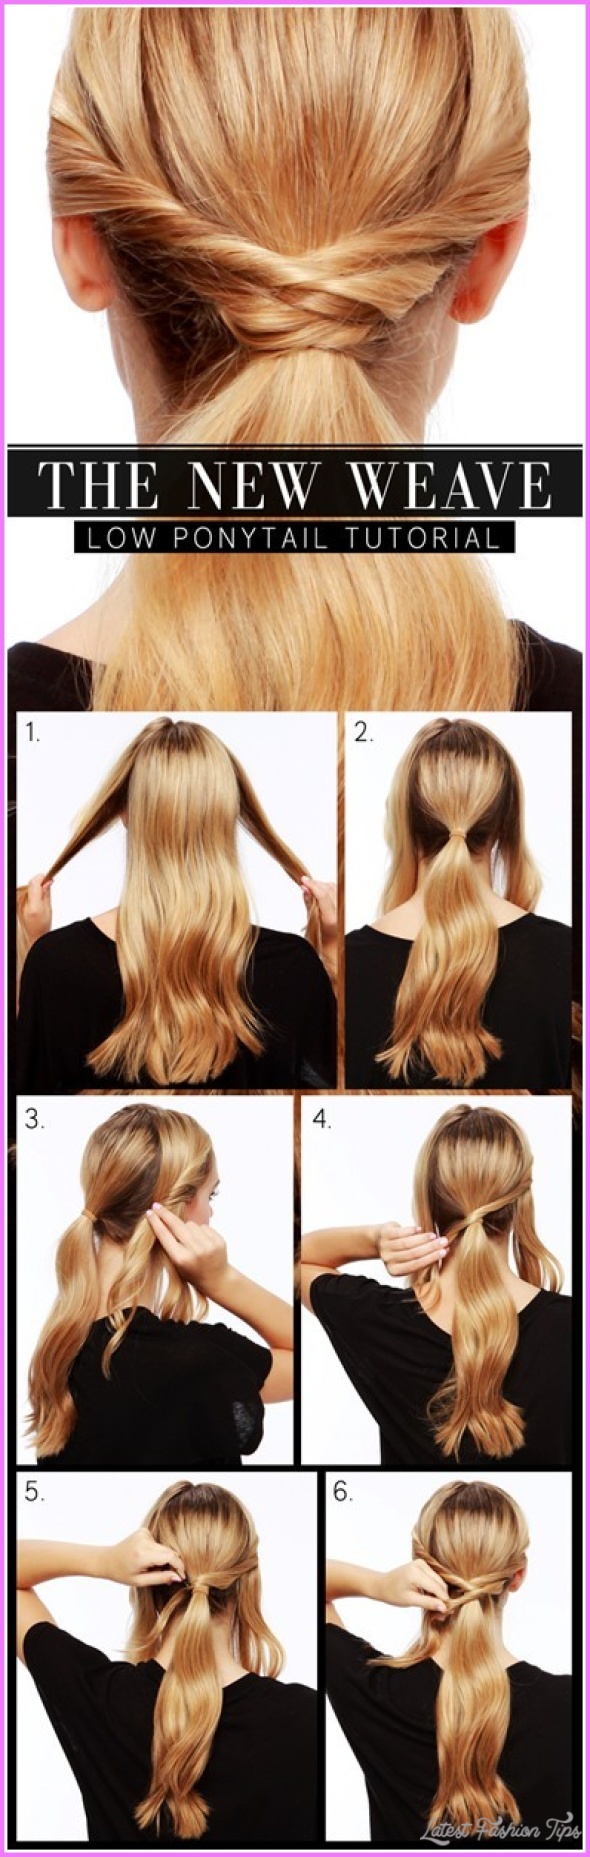 3 Days Of Holiday Hairstyles For Long And Short Hair Latestfashiontips Com